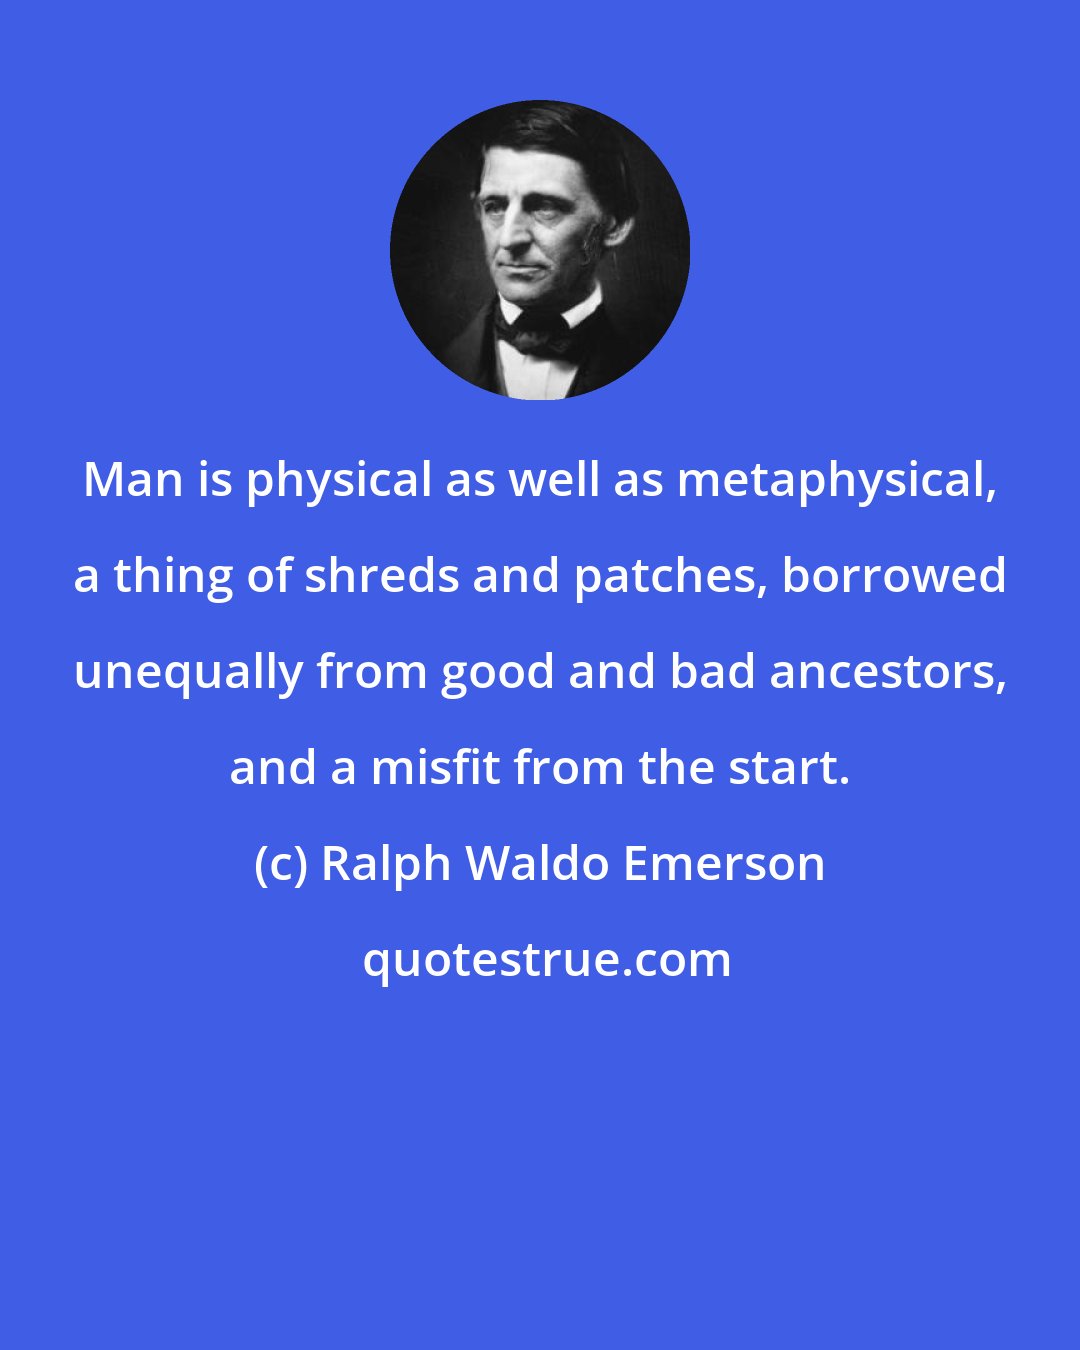 Ralph Waldo Emerson: Man is physical as well as metaphysical, a thing of shreds and patches, borrowed unequally from good and bad ancestors, and a misfit from the start.